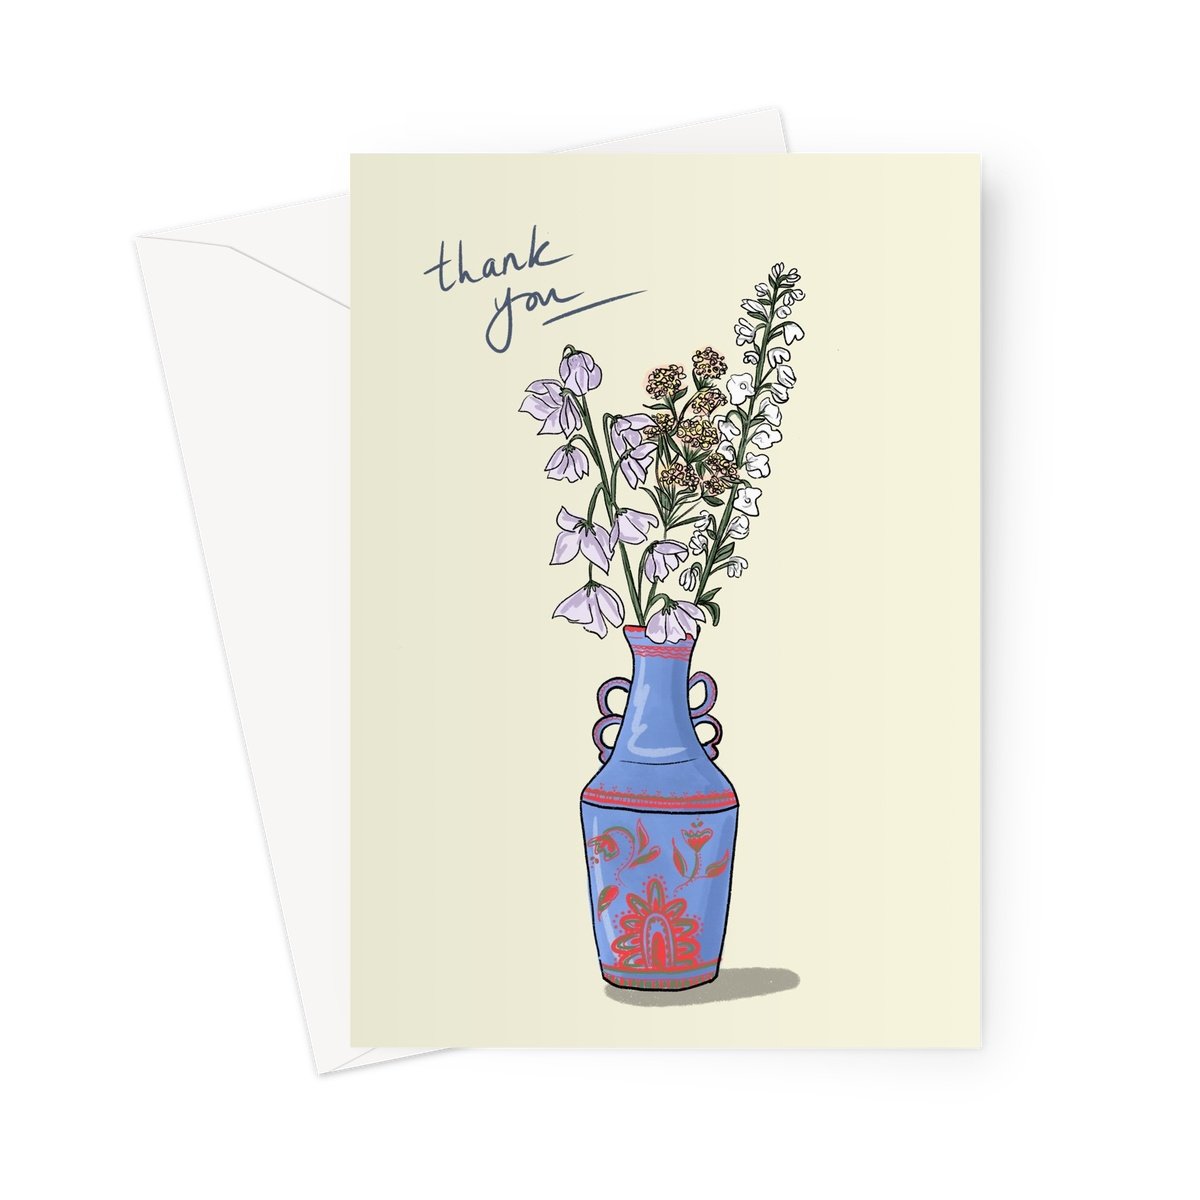 Thank you cards - 10 multi pack